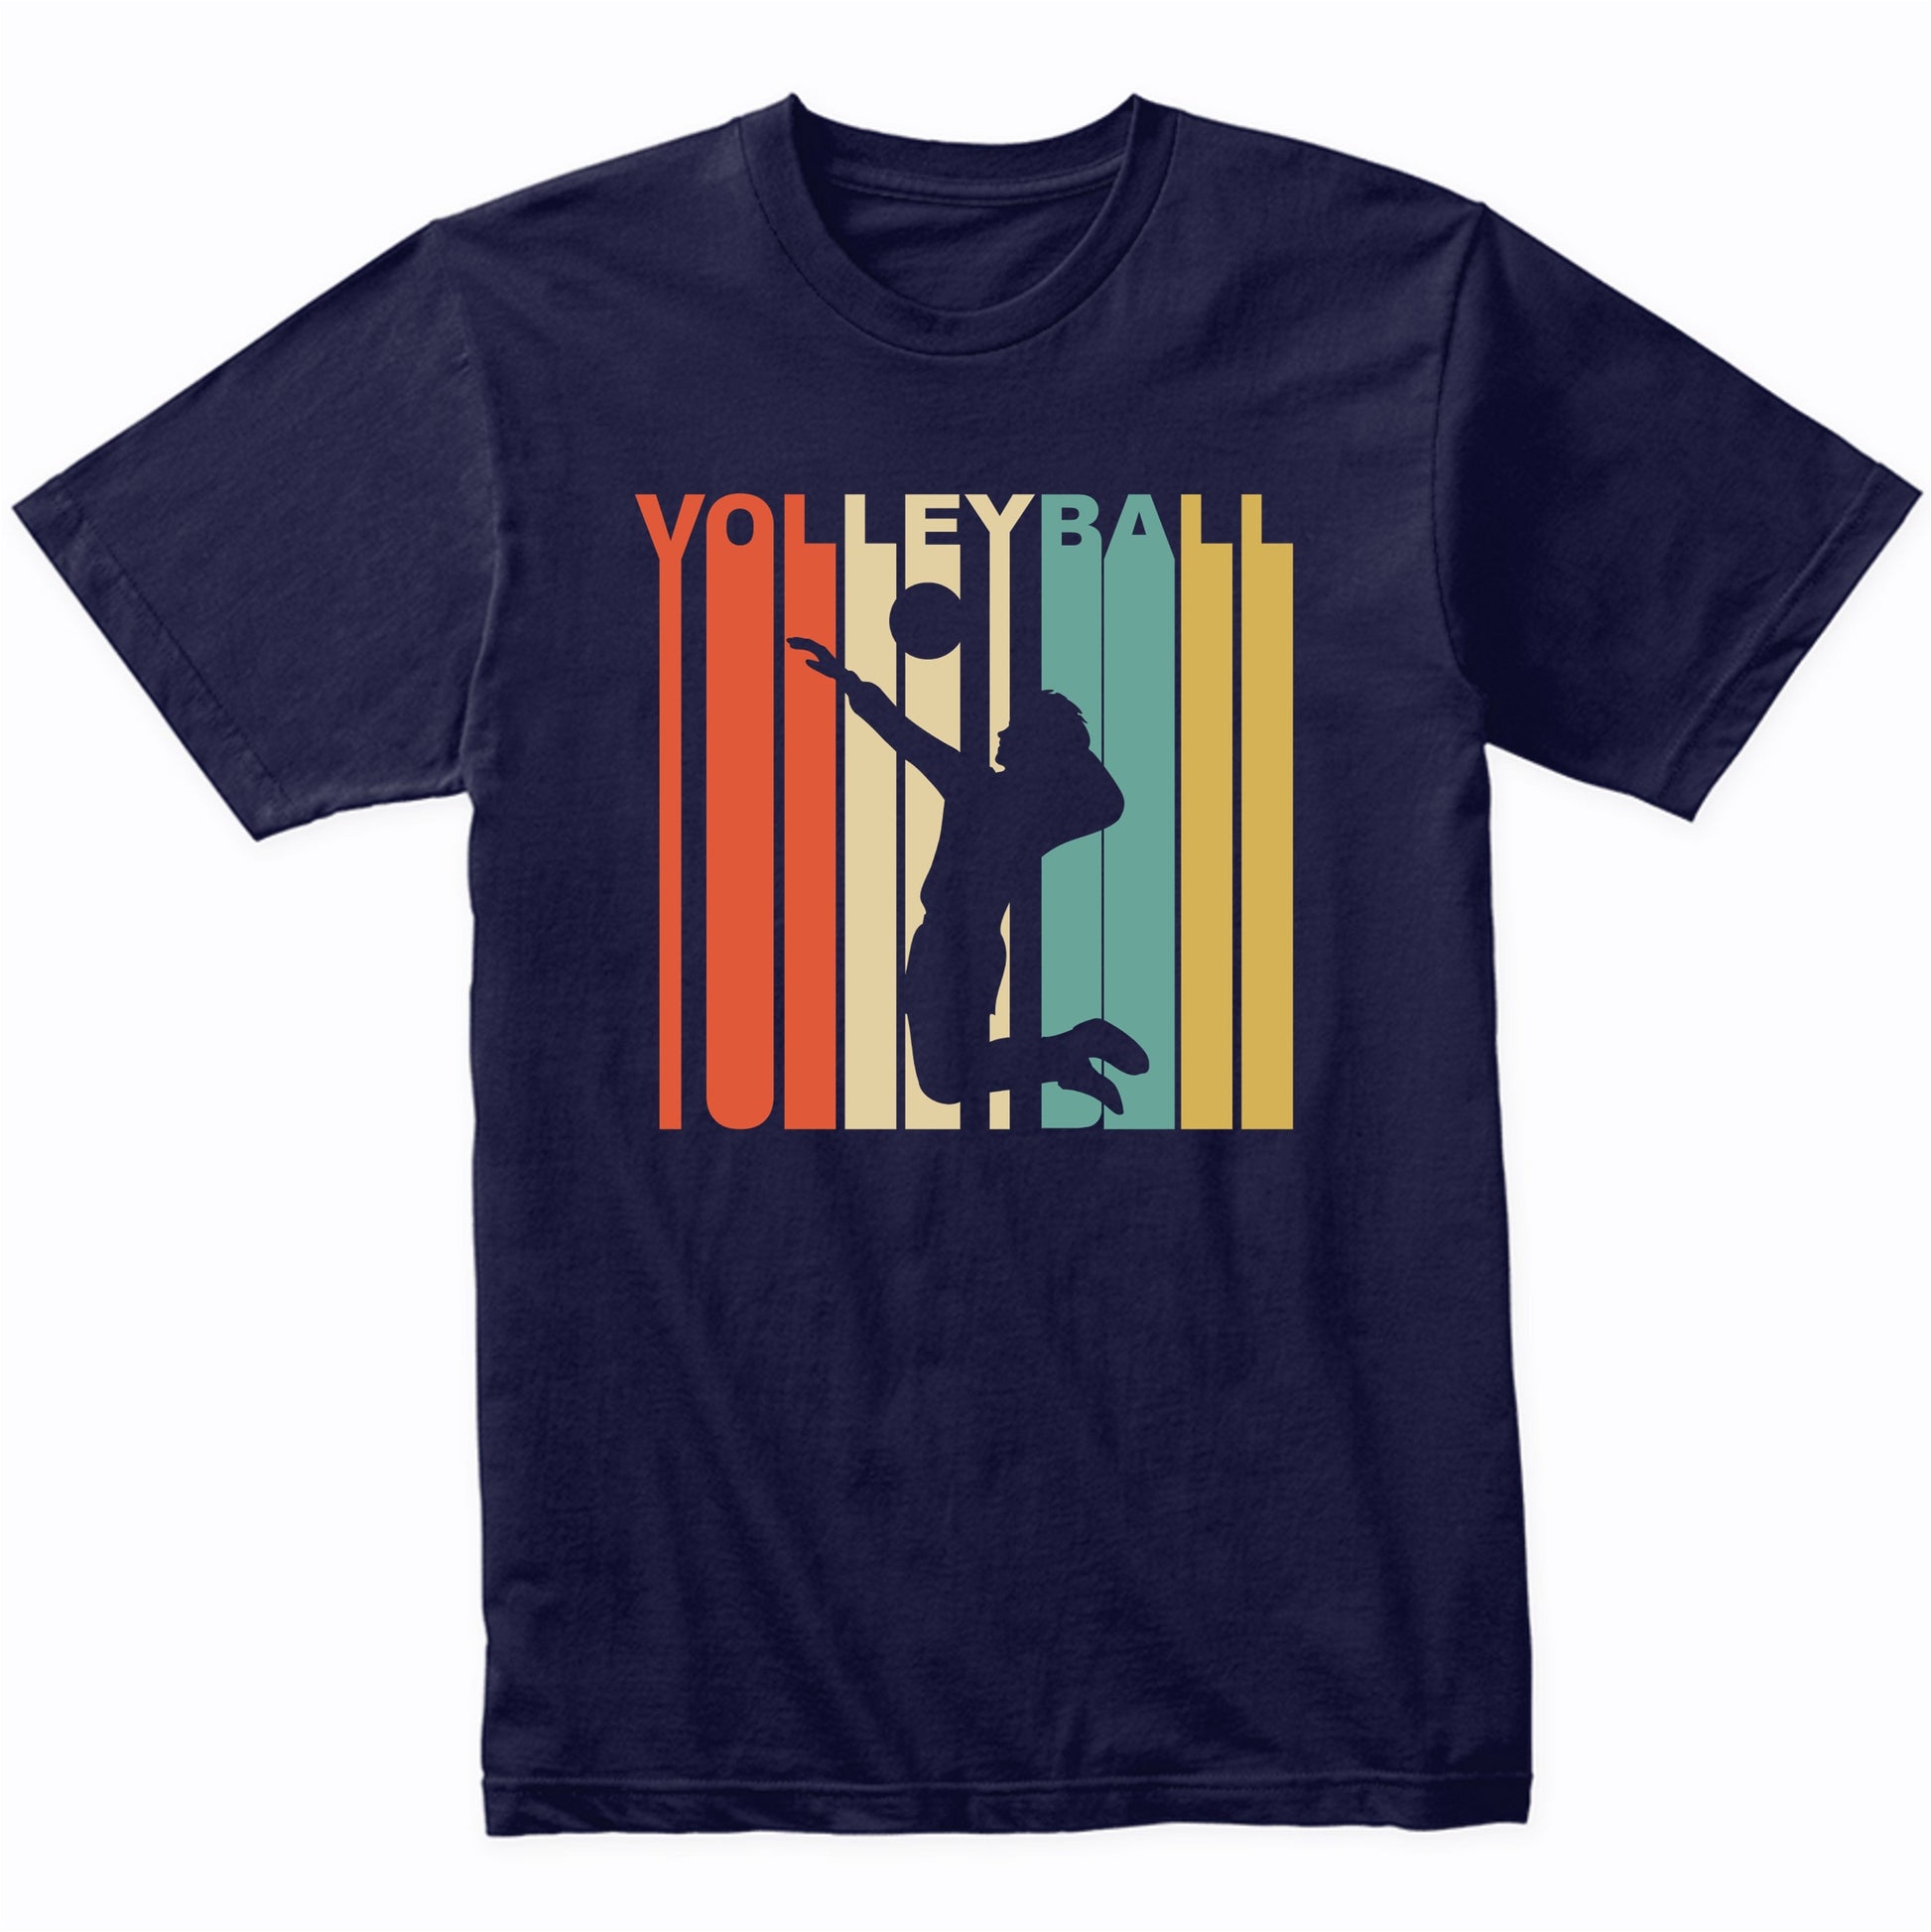 Retro 1970's Style Volleyball Player Silhouette Sports Shirt